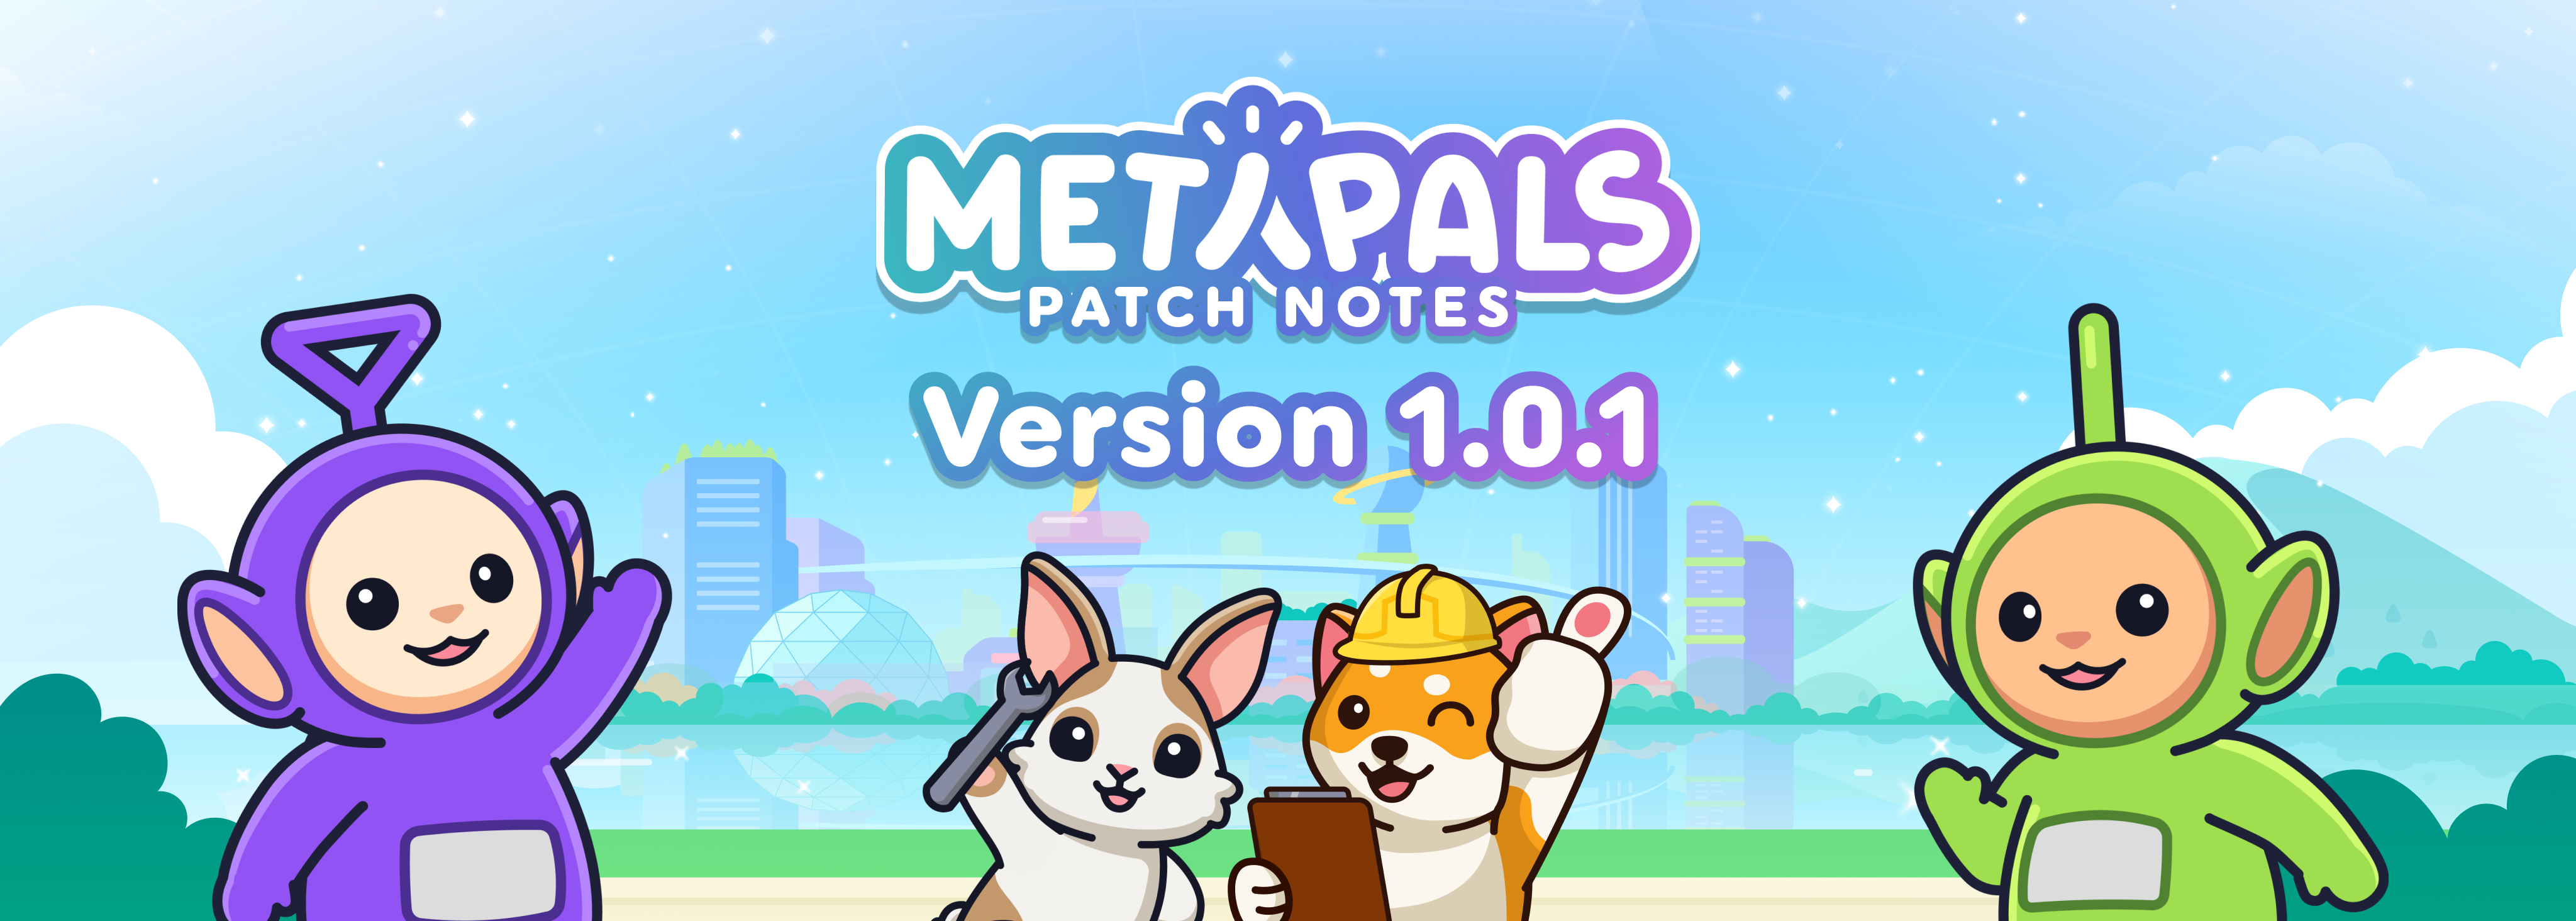 Version 1.0.1 Patch Notes